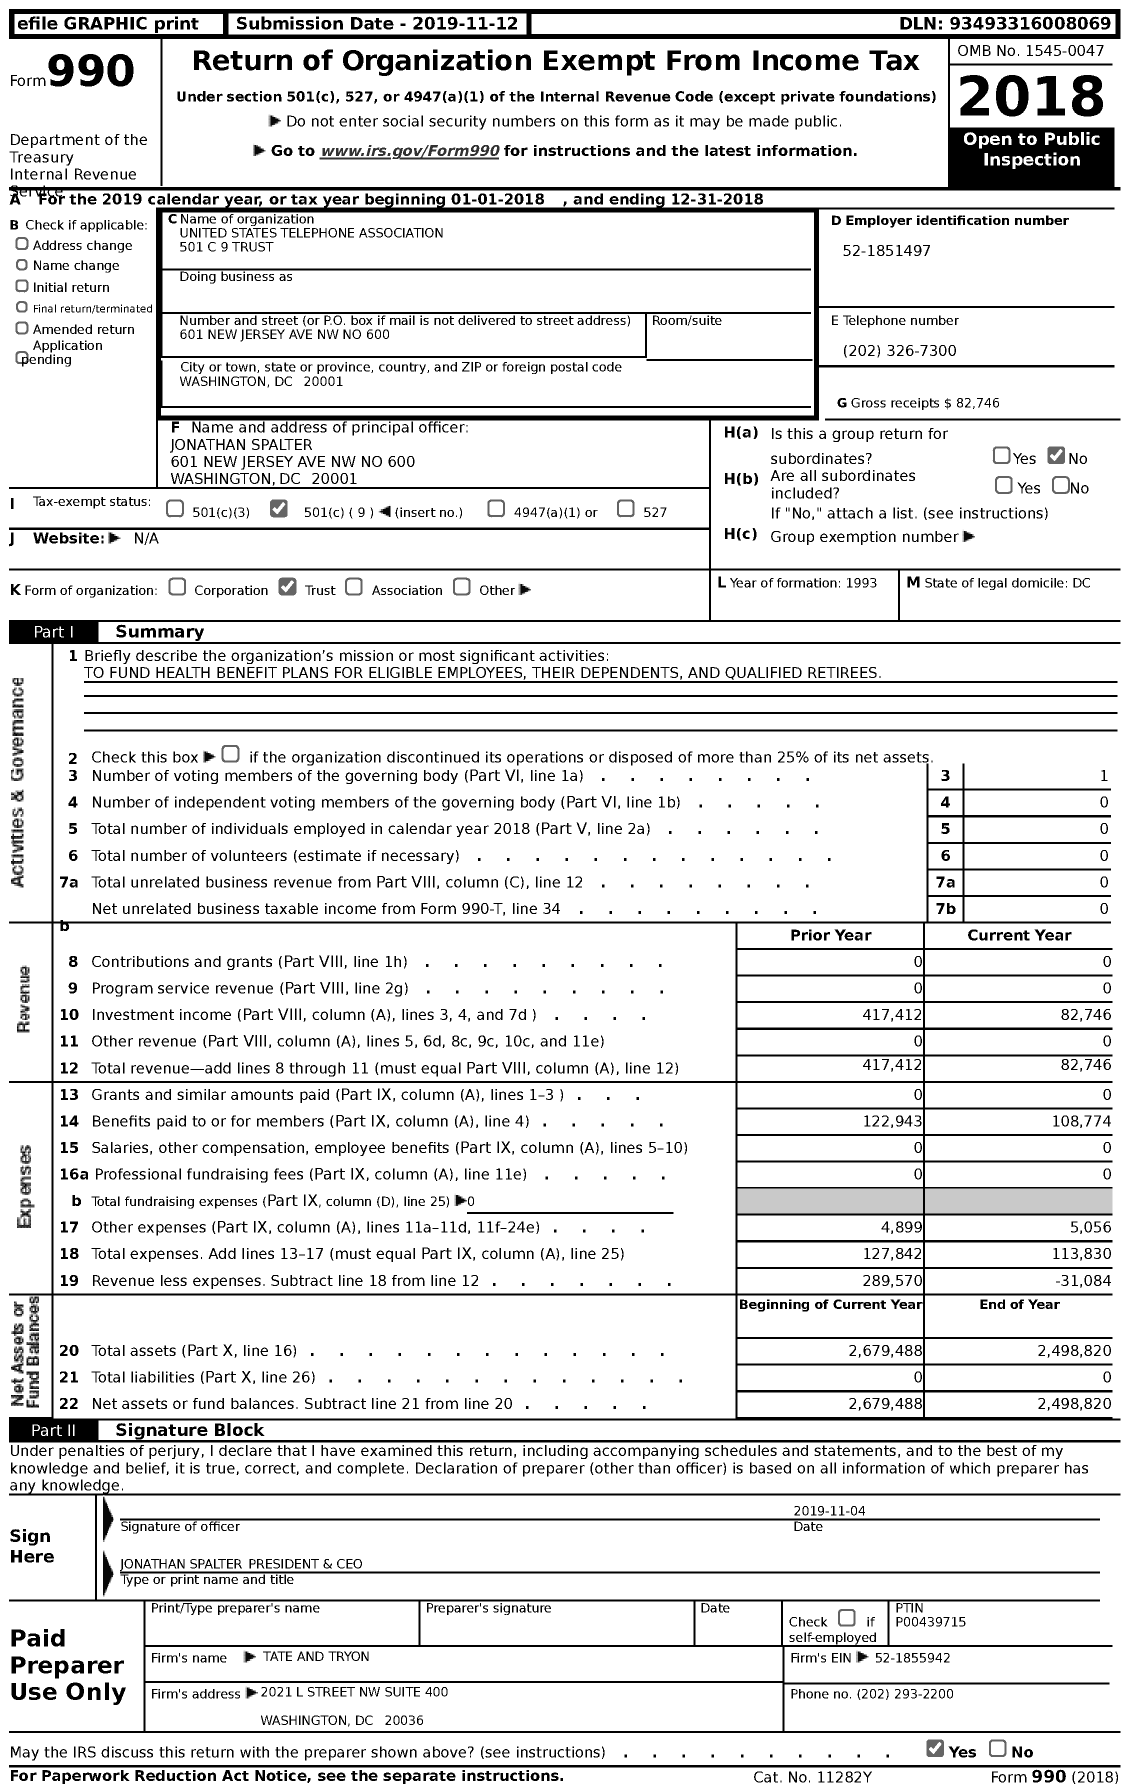 Image of first page of 2018 Form 990 for United States Telephone Association 501 C 9 Trust